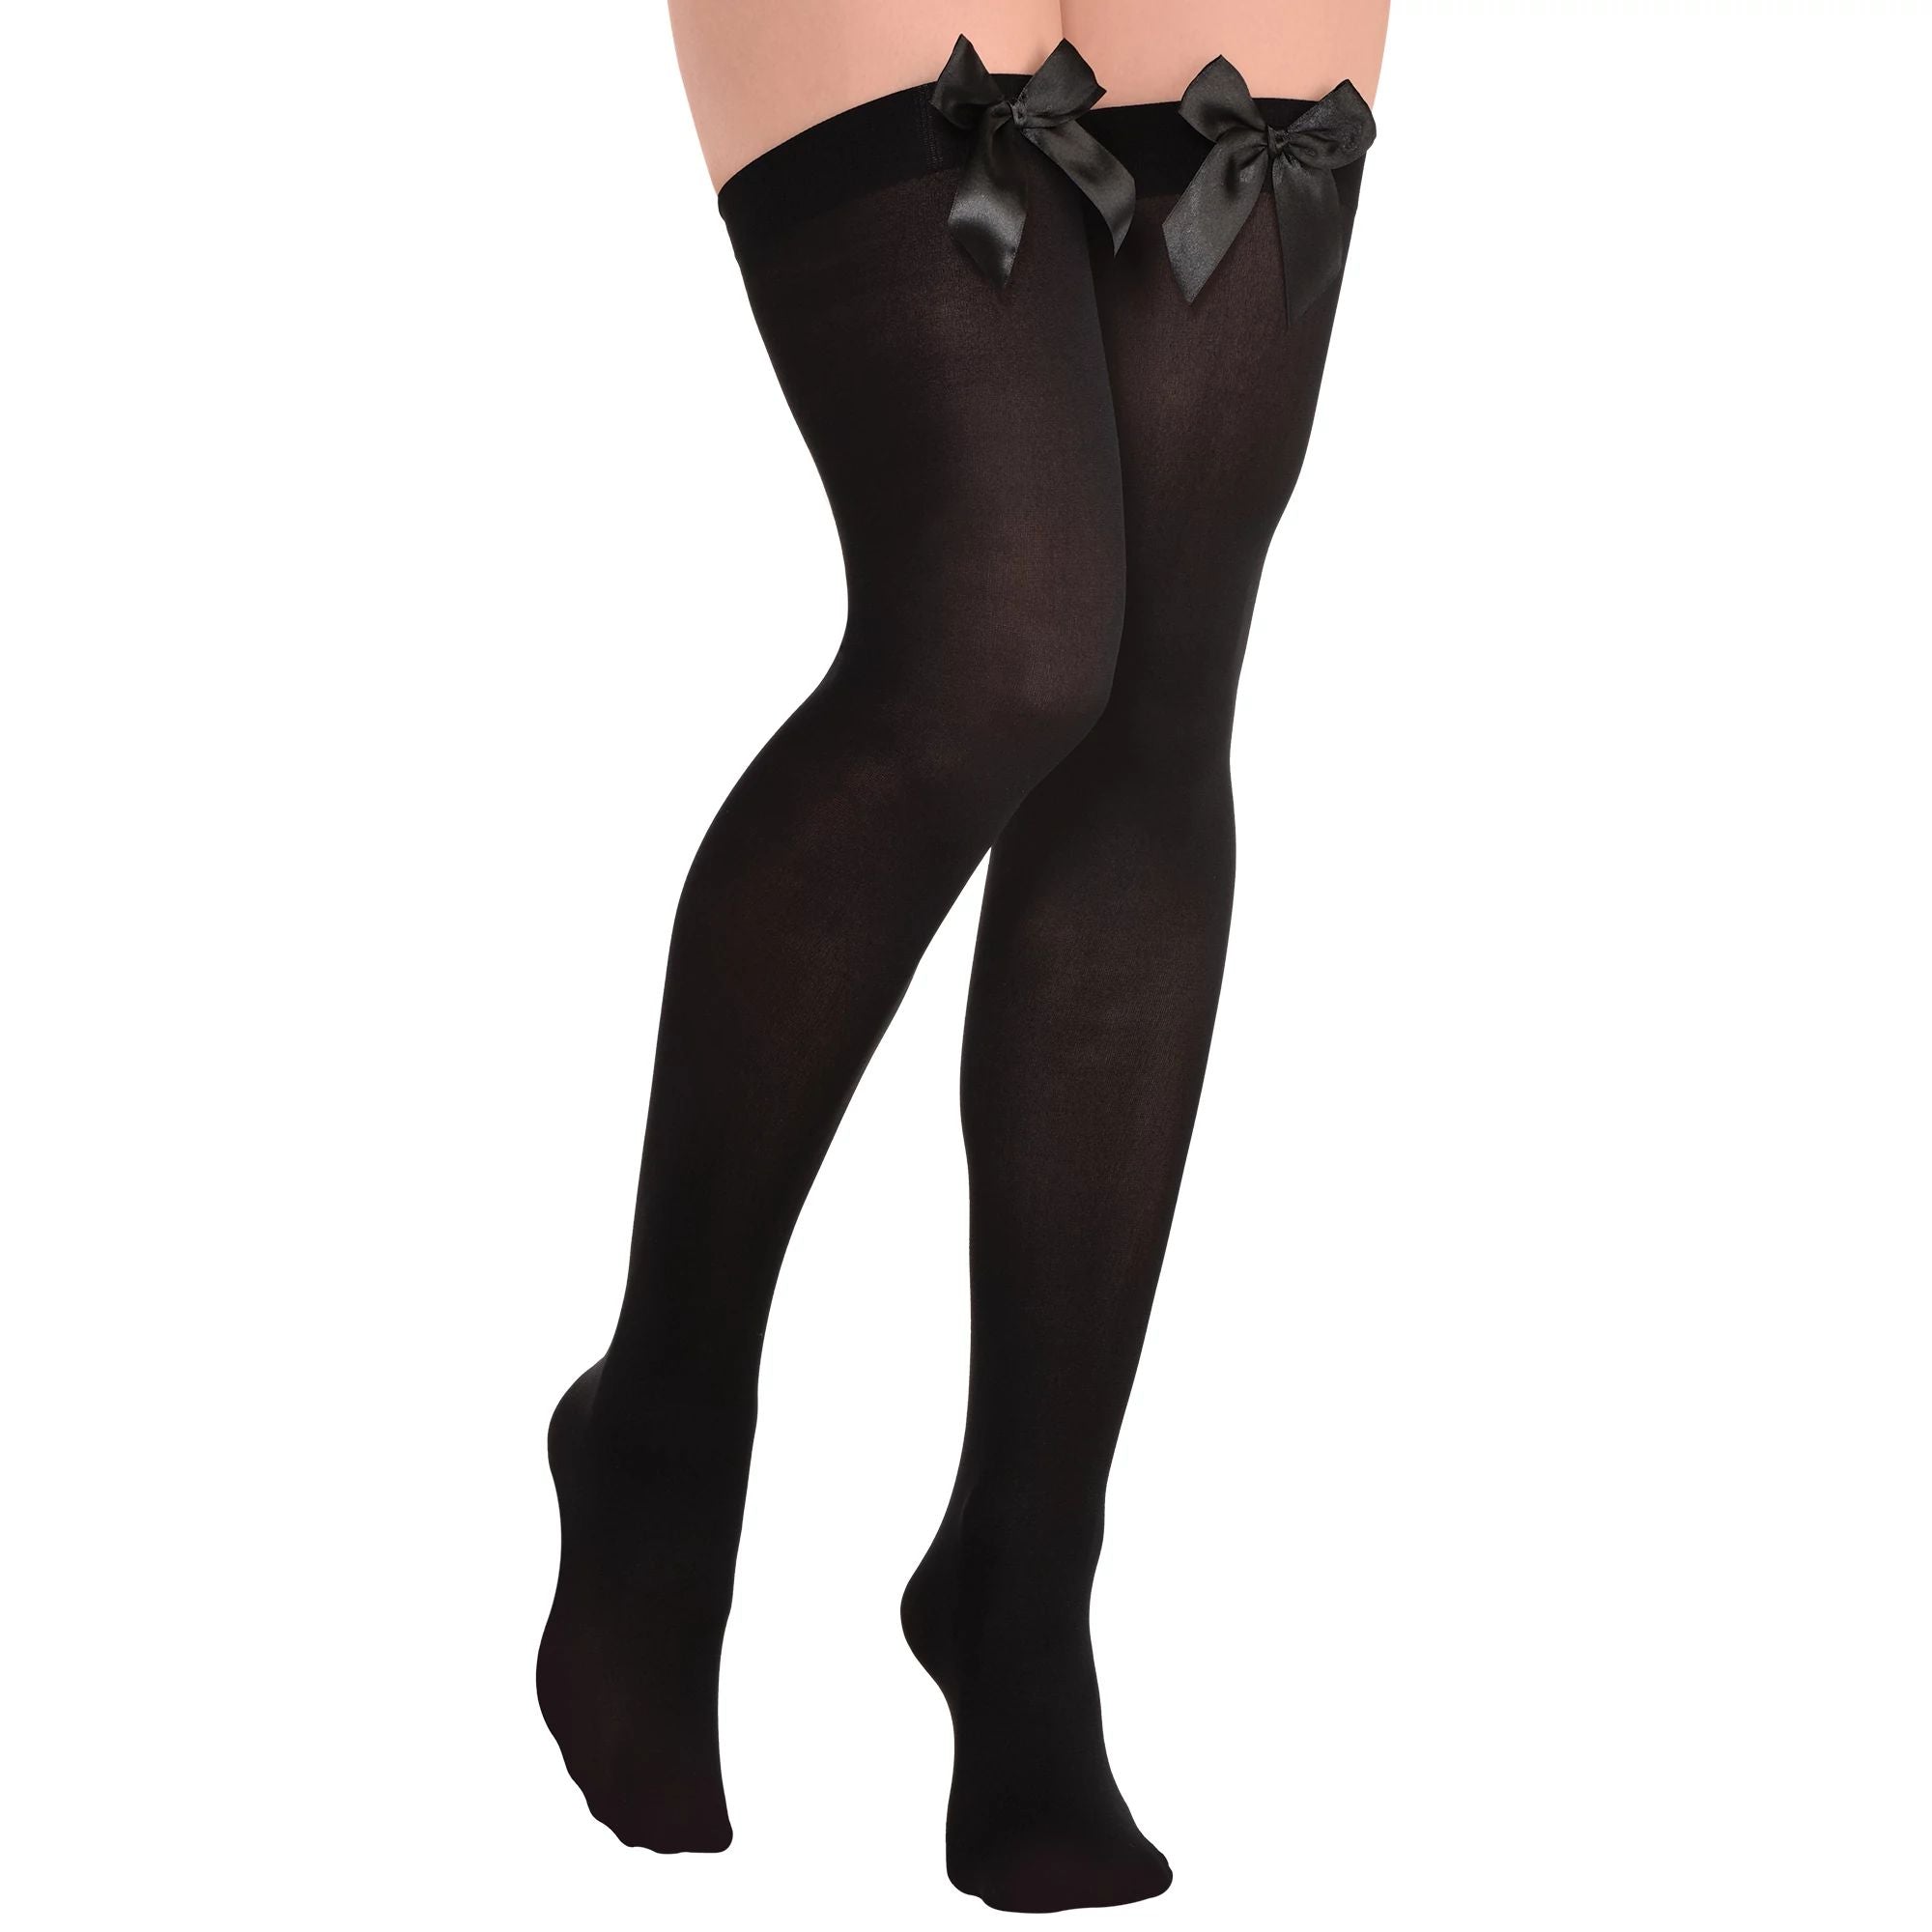 Amscan COSTUMES: ACCESSORIES Adult Black Thigh Highs With Black Satin Bow